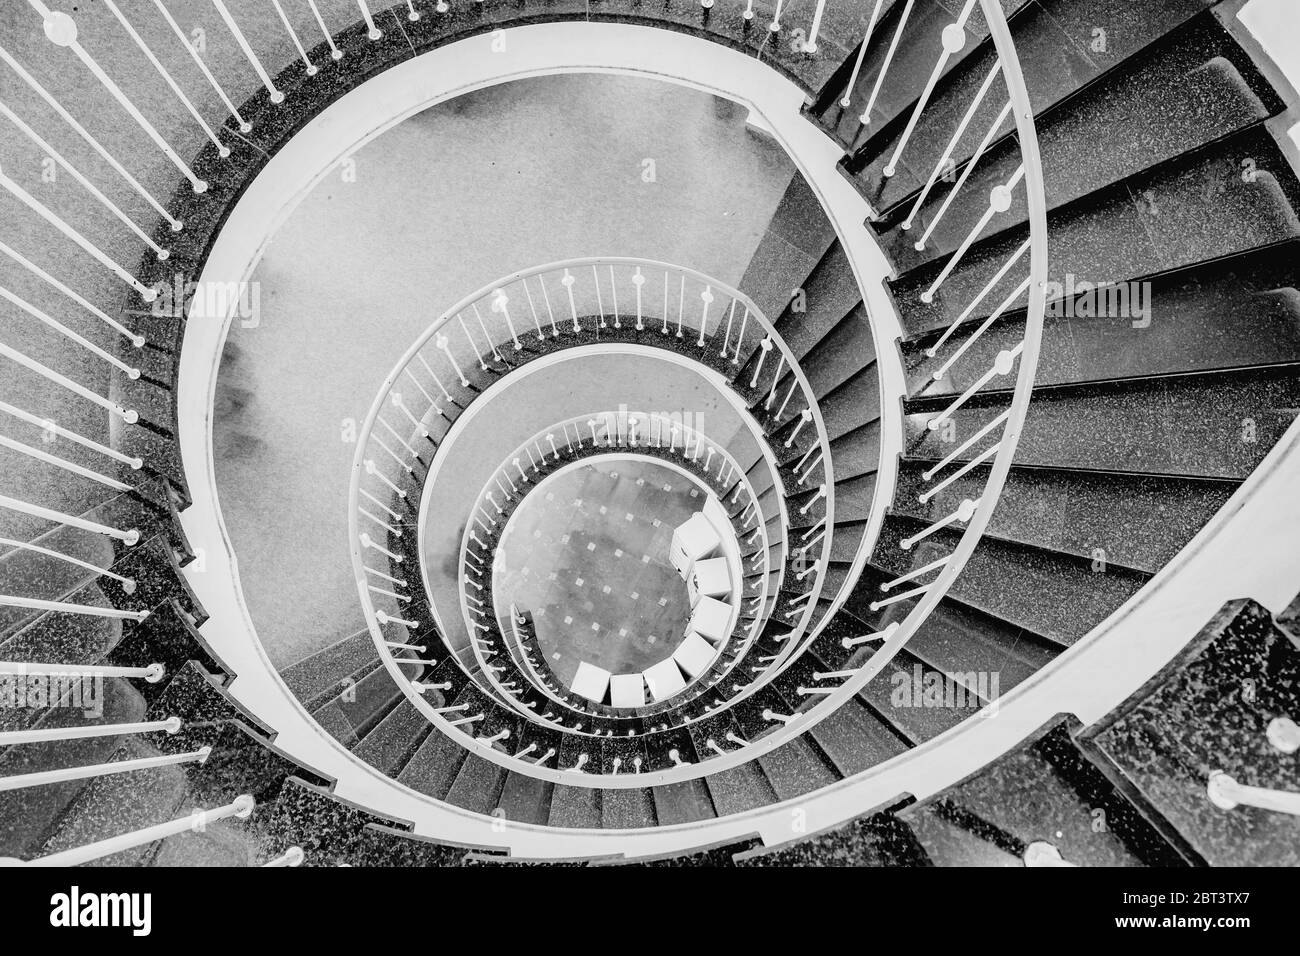 Spiral staircase in black and white. Stock Photo